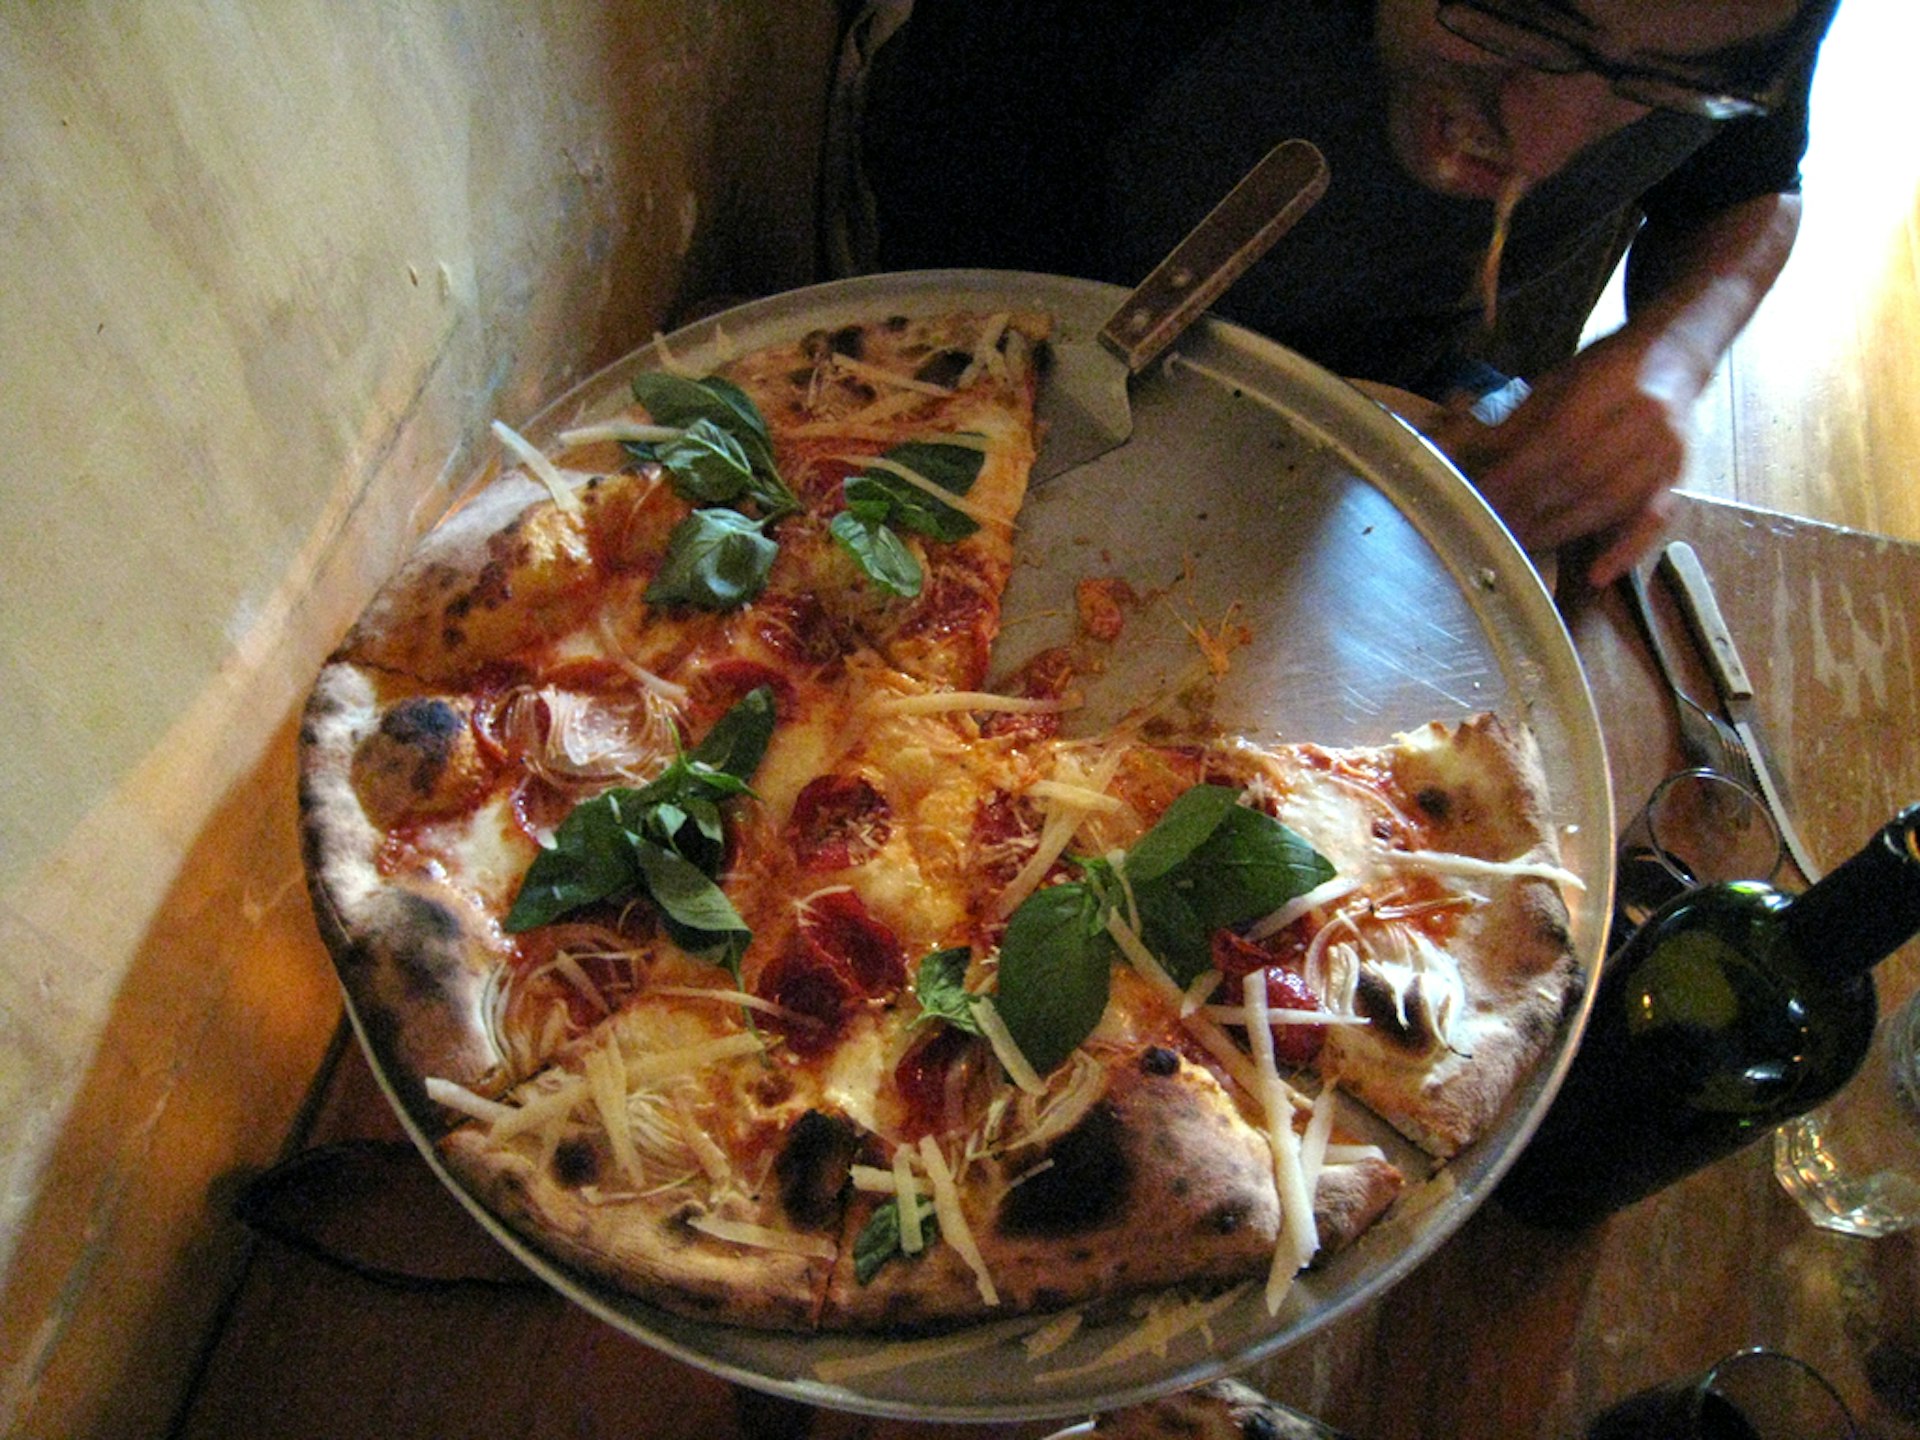 Lucali pizza. Photo by Eric Mueller / CC BY 2.0